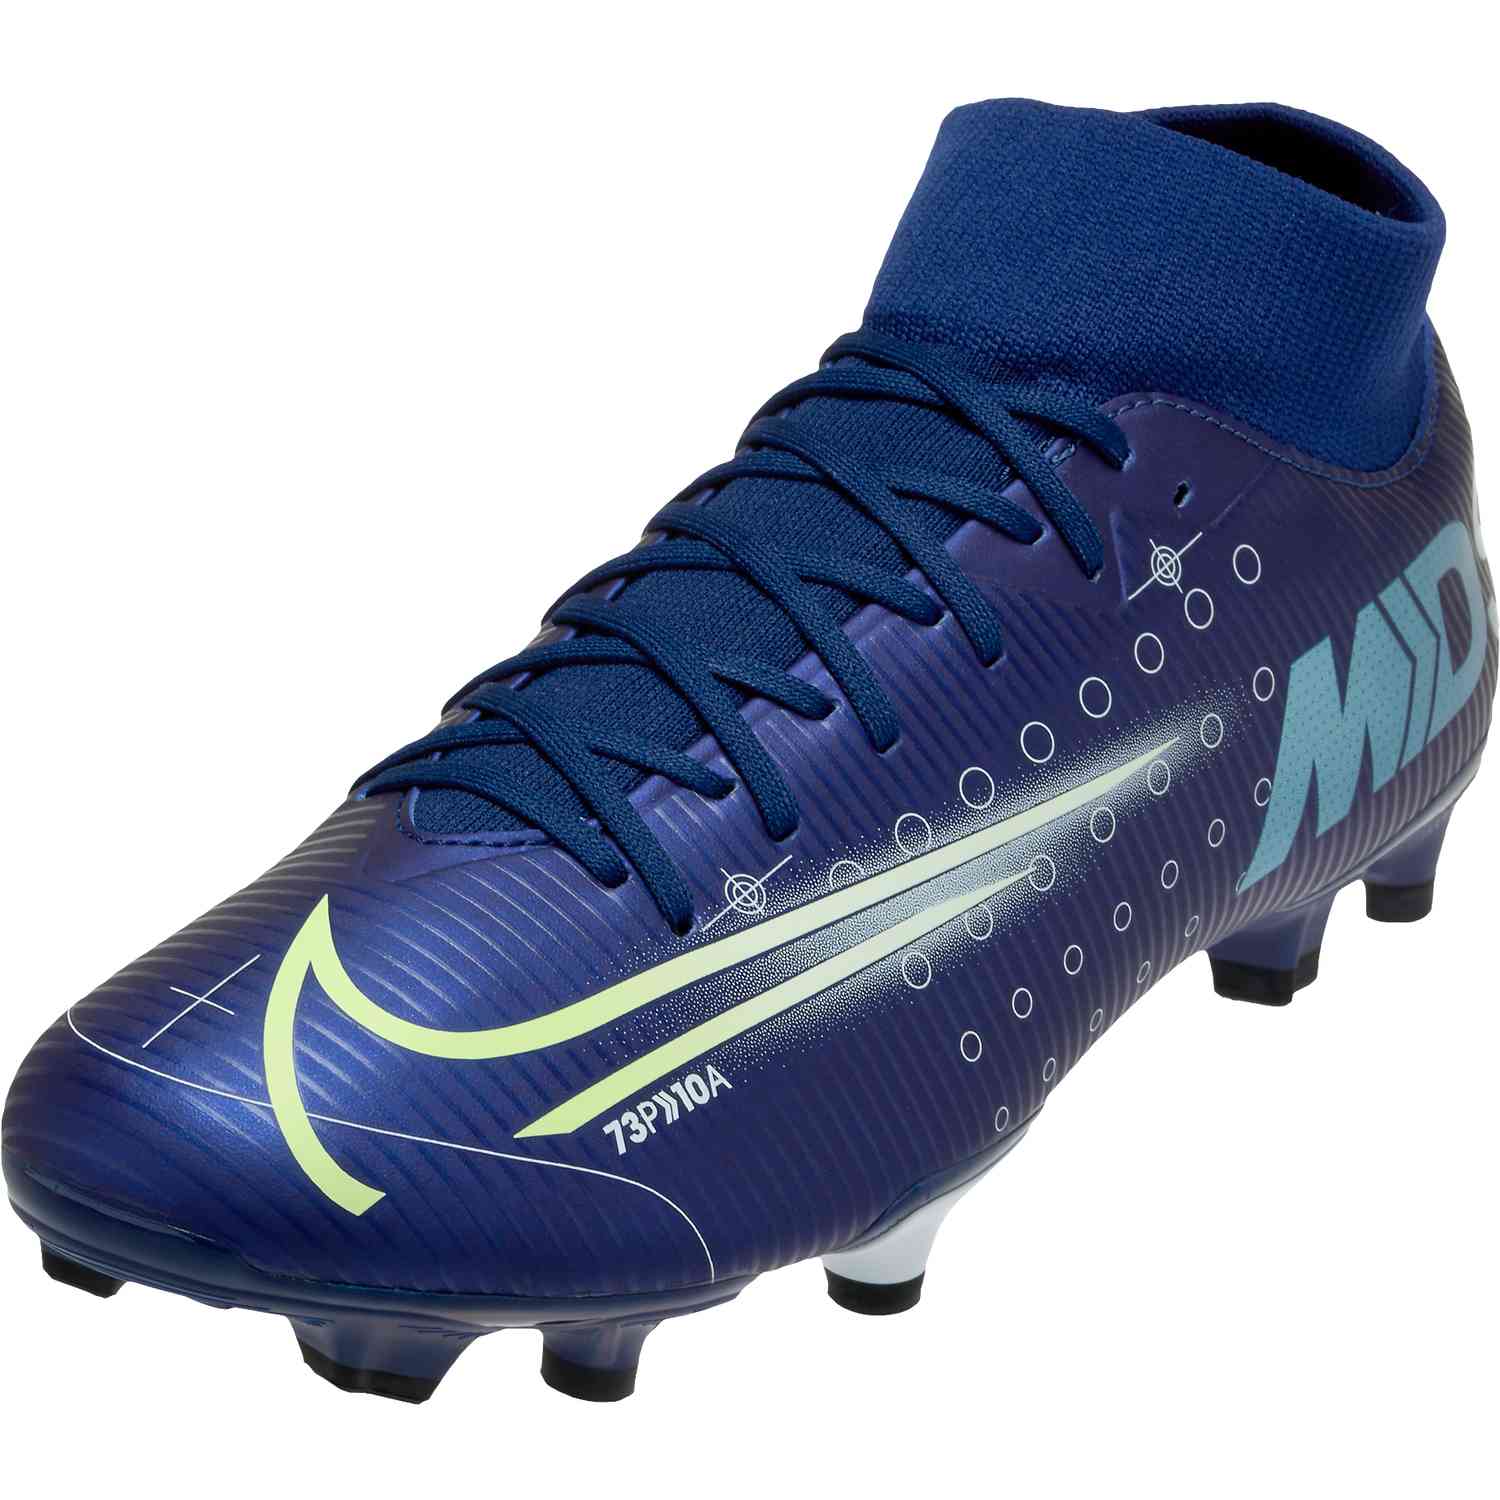 Nike Mercurial Superfly 7 Academy MDS TF Premium soccer